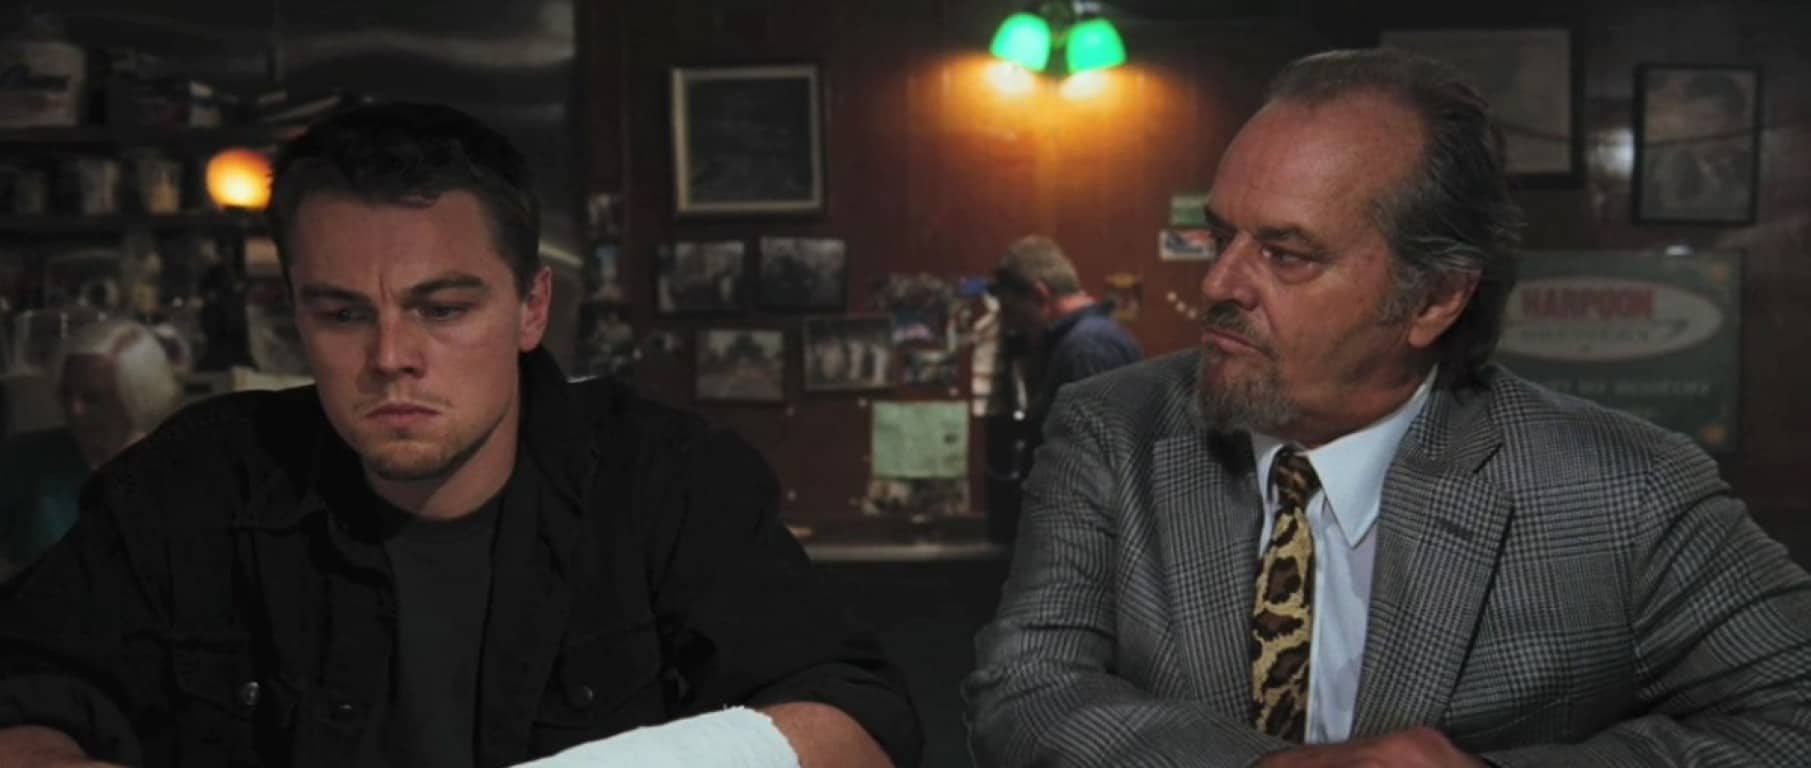 79th Academy Awards (2006): The Departed | Leonardo DiCaprio and Jack Nicholson in The Departed (2006)